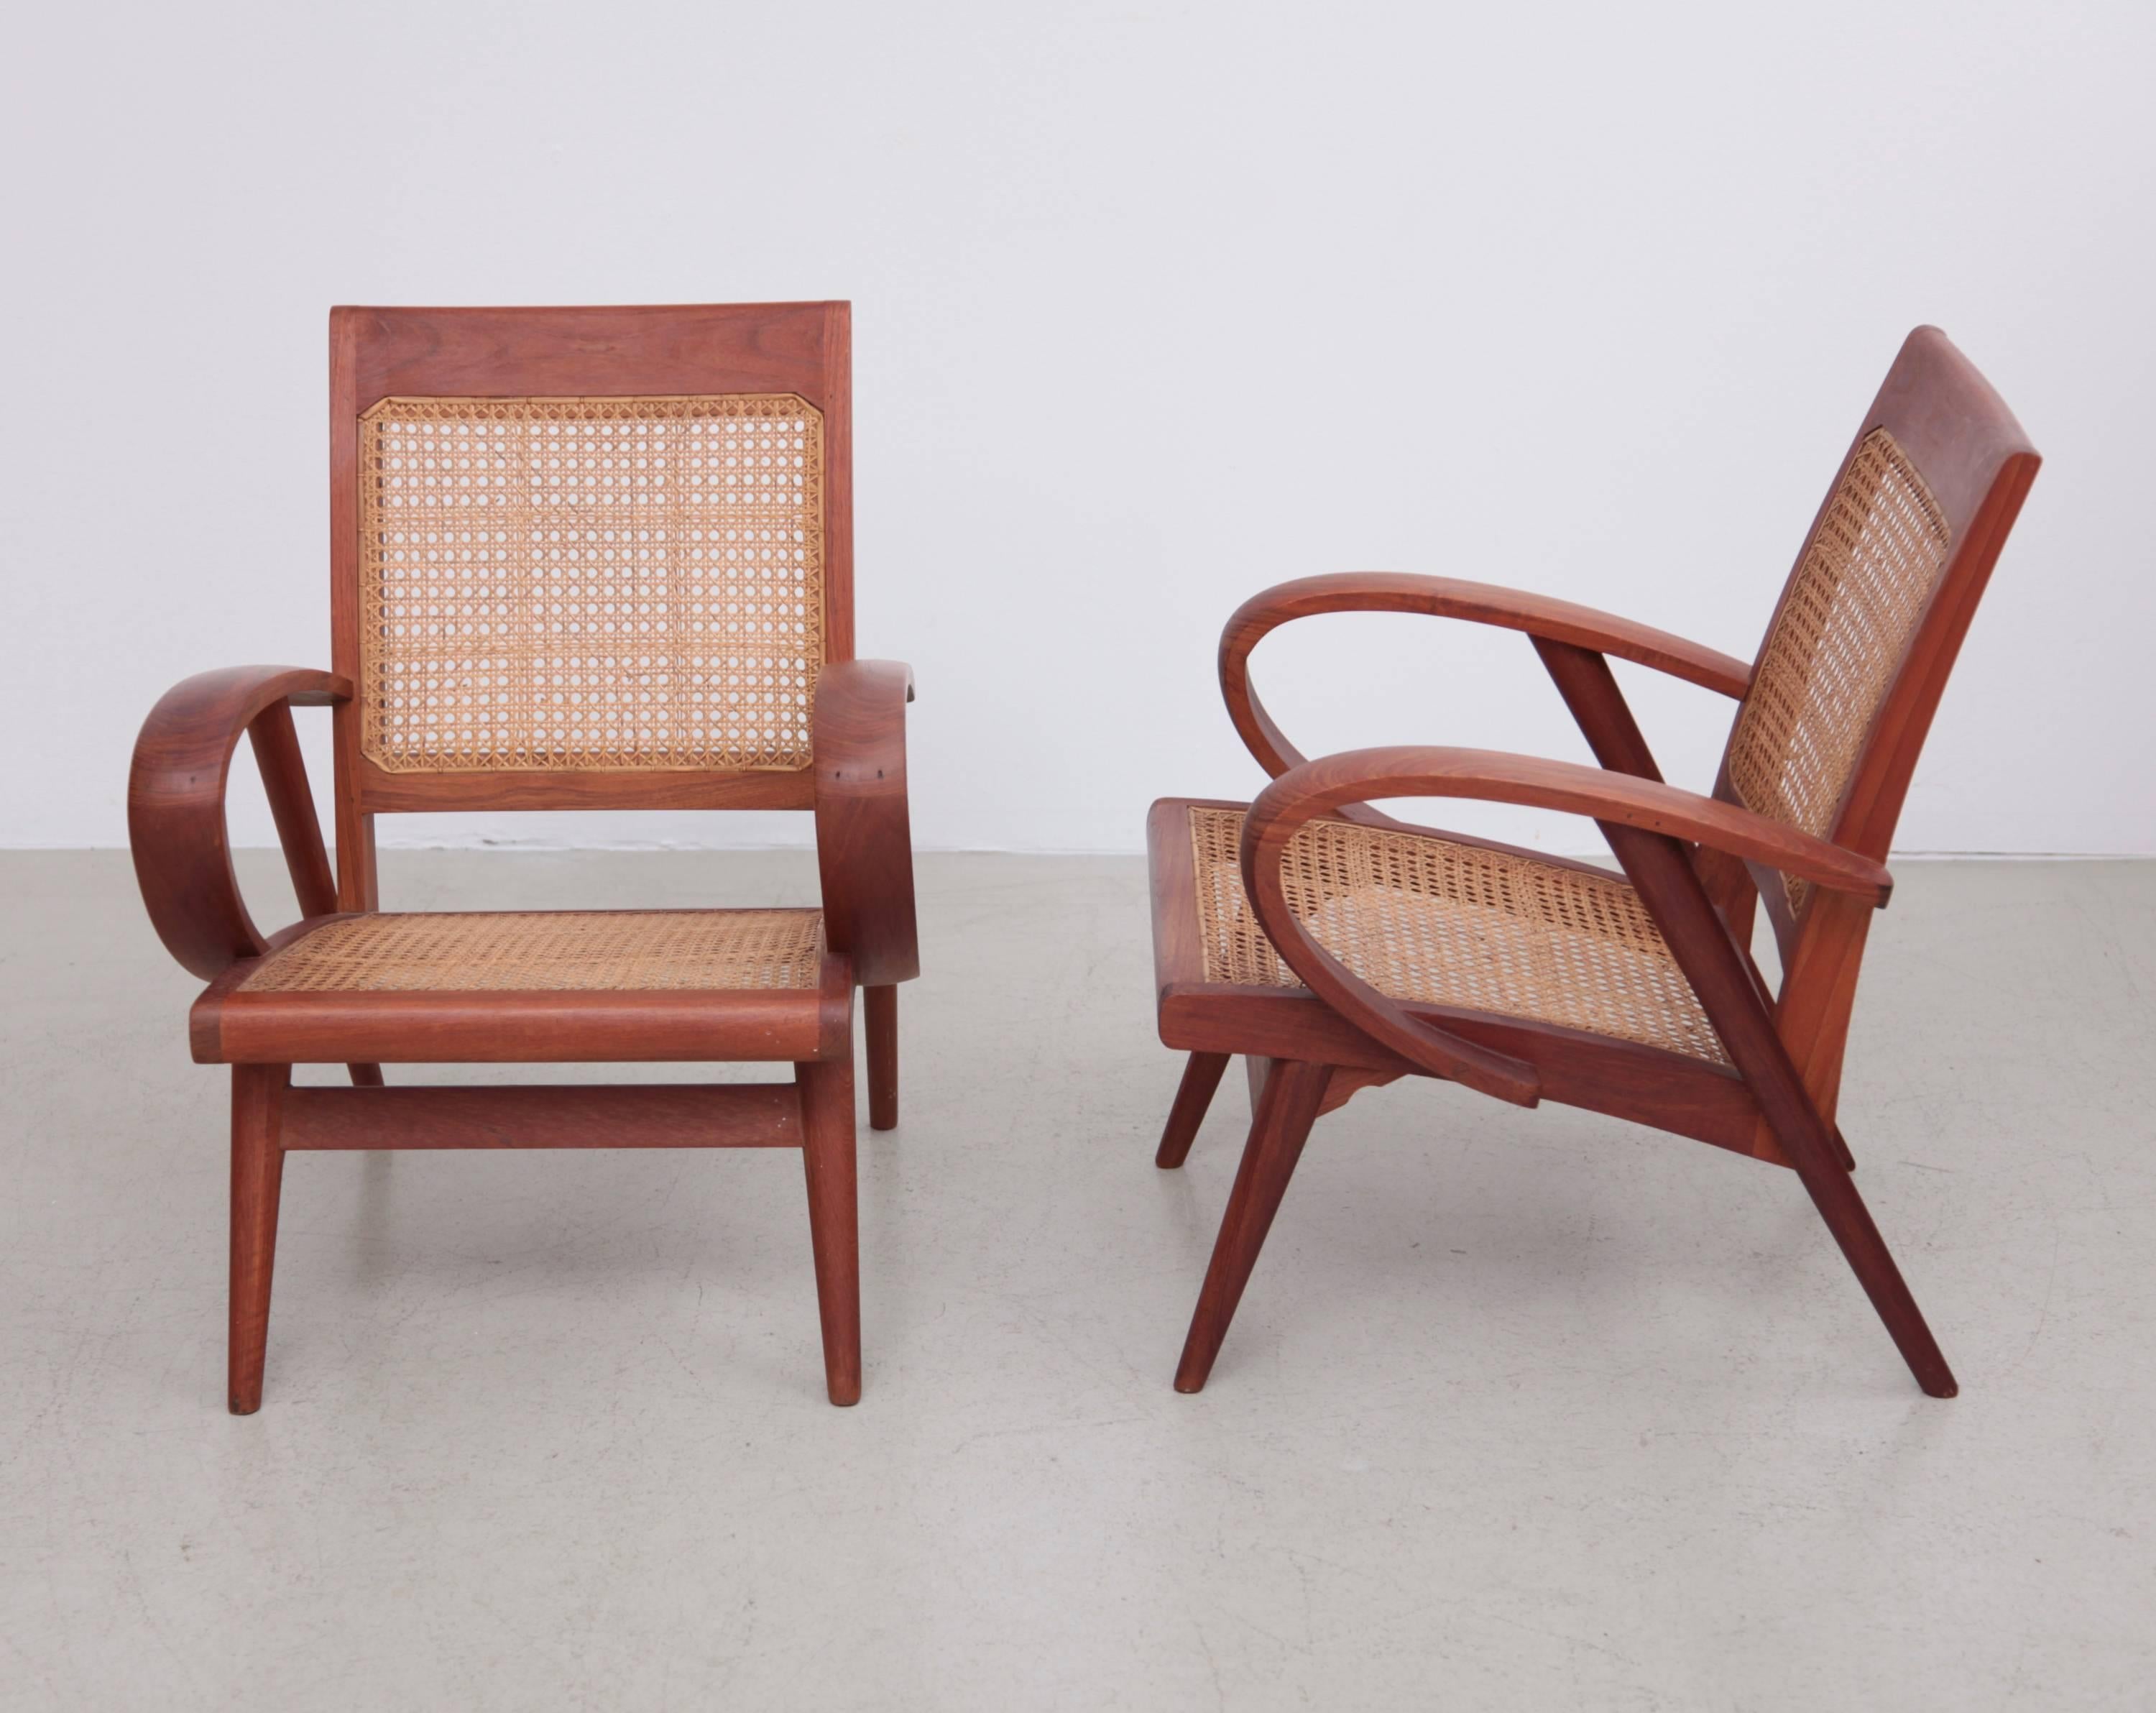 Absolute mint and elegant pair of Danish studio lounge chairs with cane back and seat. Stunning woodworking with only wooden connections.